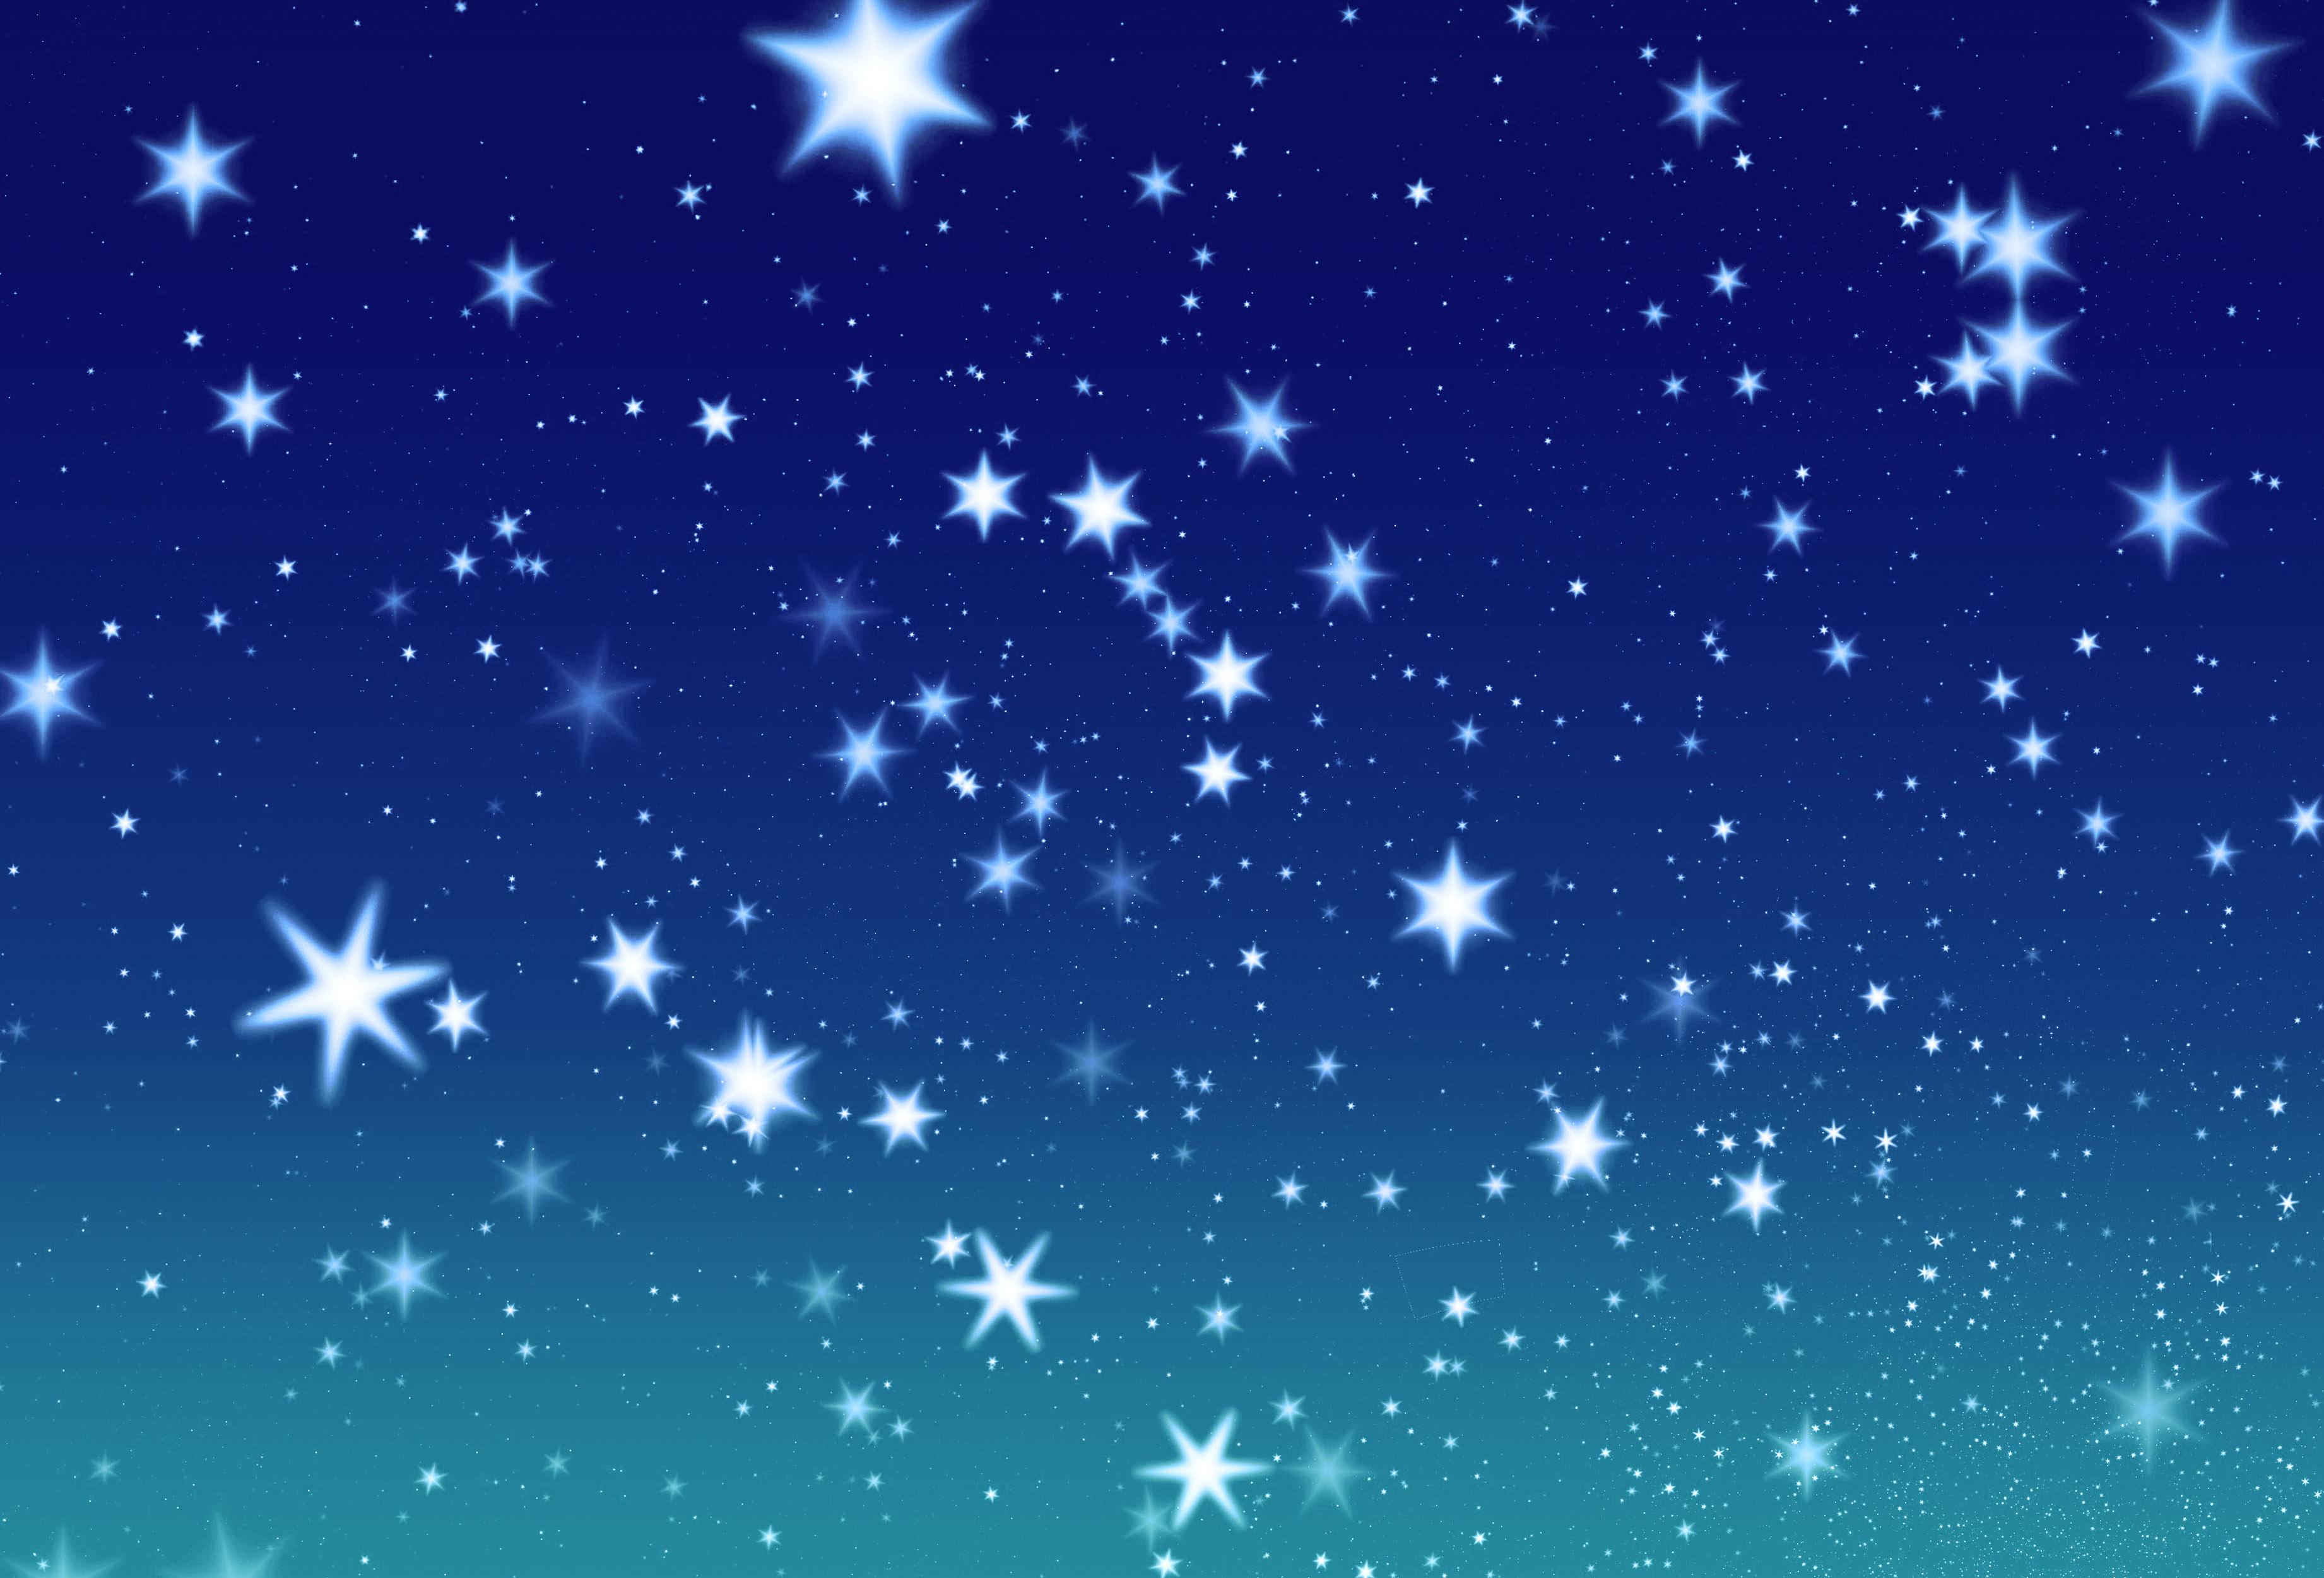 35 Stars at Xmas Backgrounds Image, Cards or Christmas Wallpapers